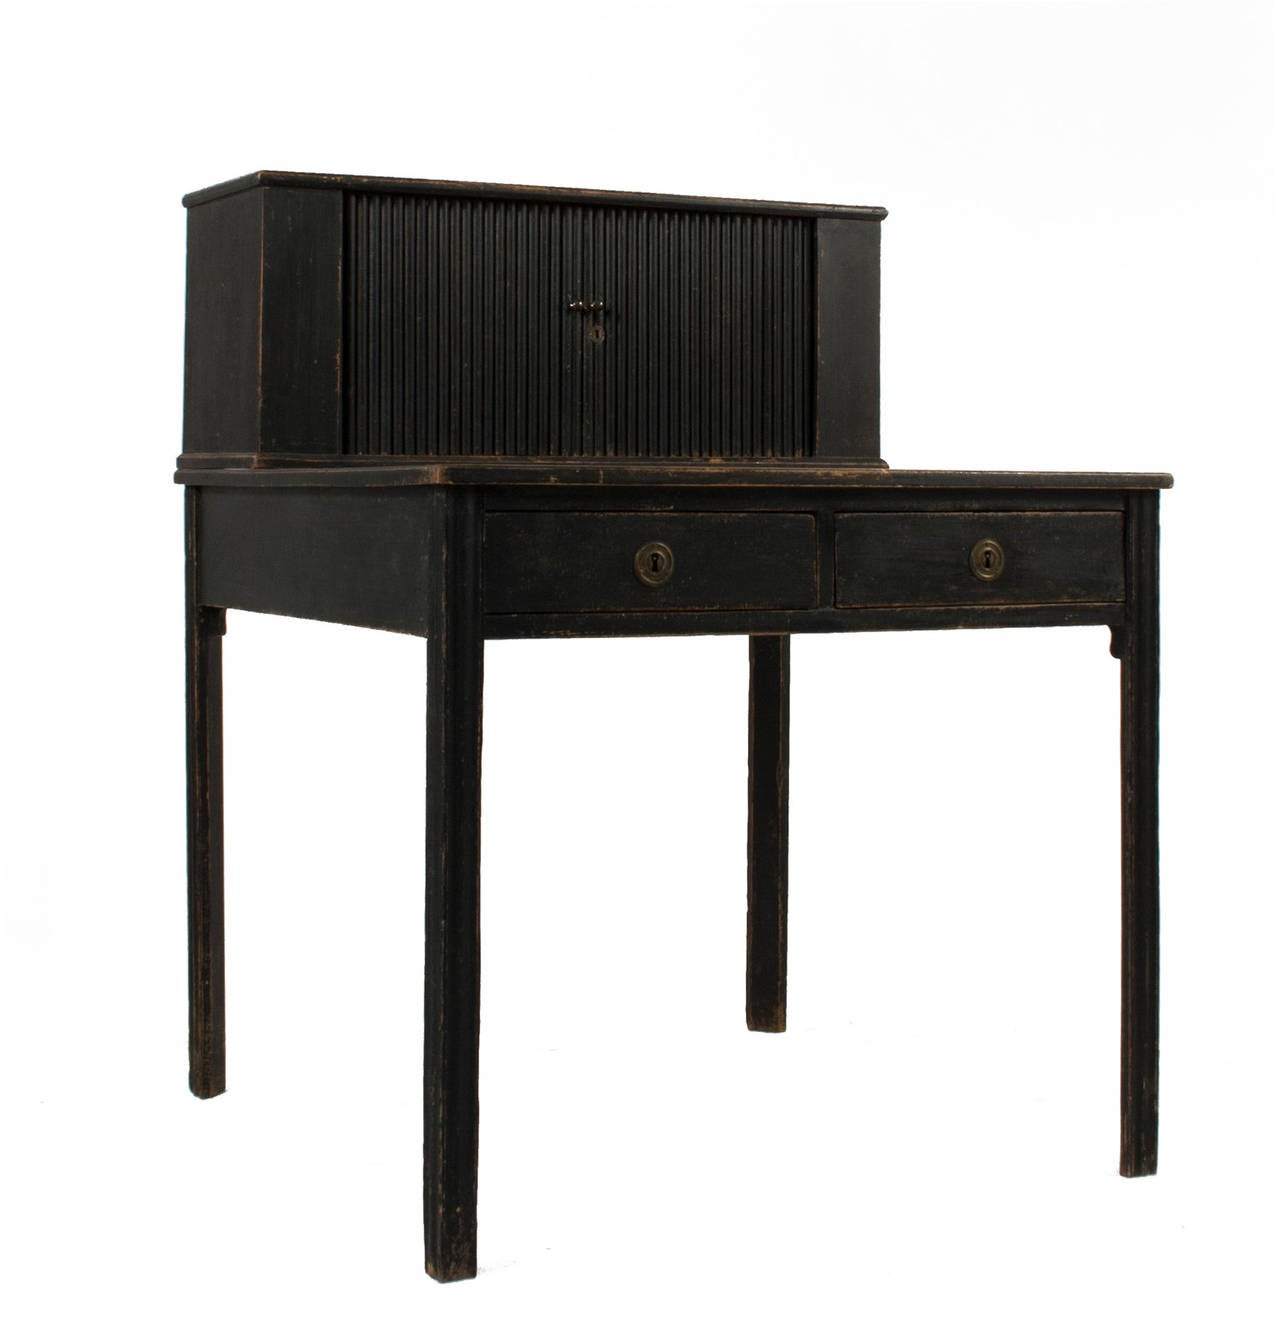 Gustavian desk with two drawers, leather top and another compartment on top with sliding doors. It's signed CLB for Carl Lindborg who was Stockholm Master during the late 1700s.